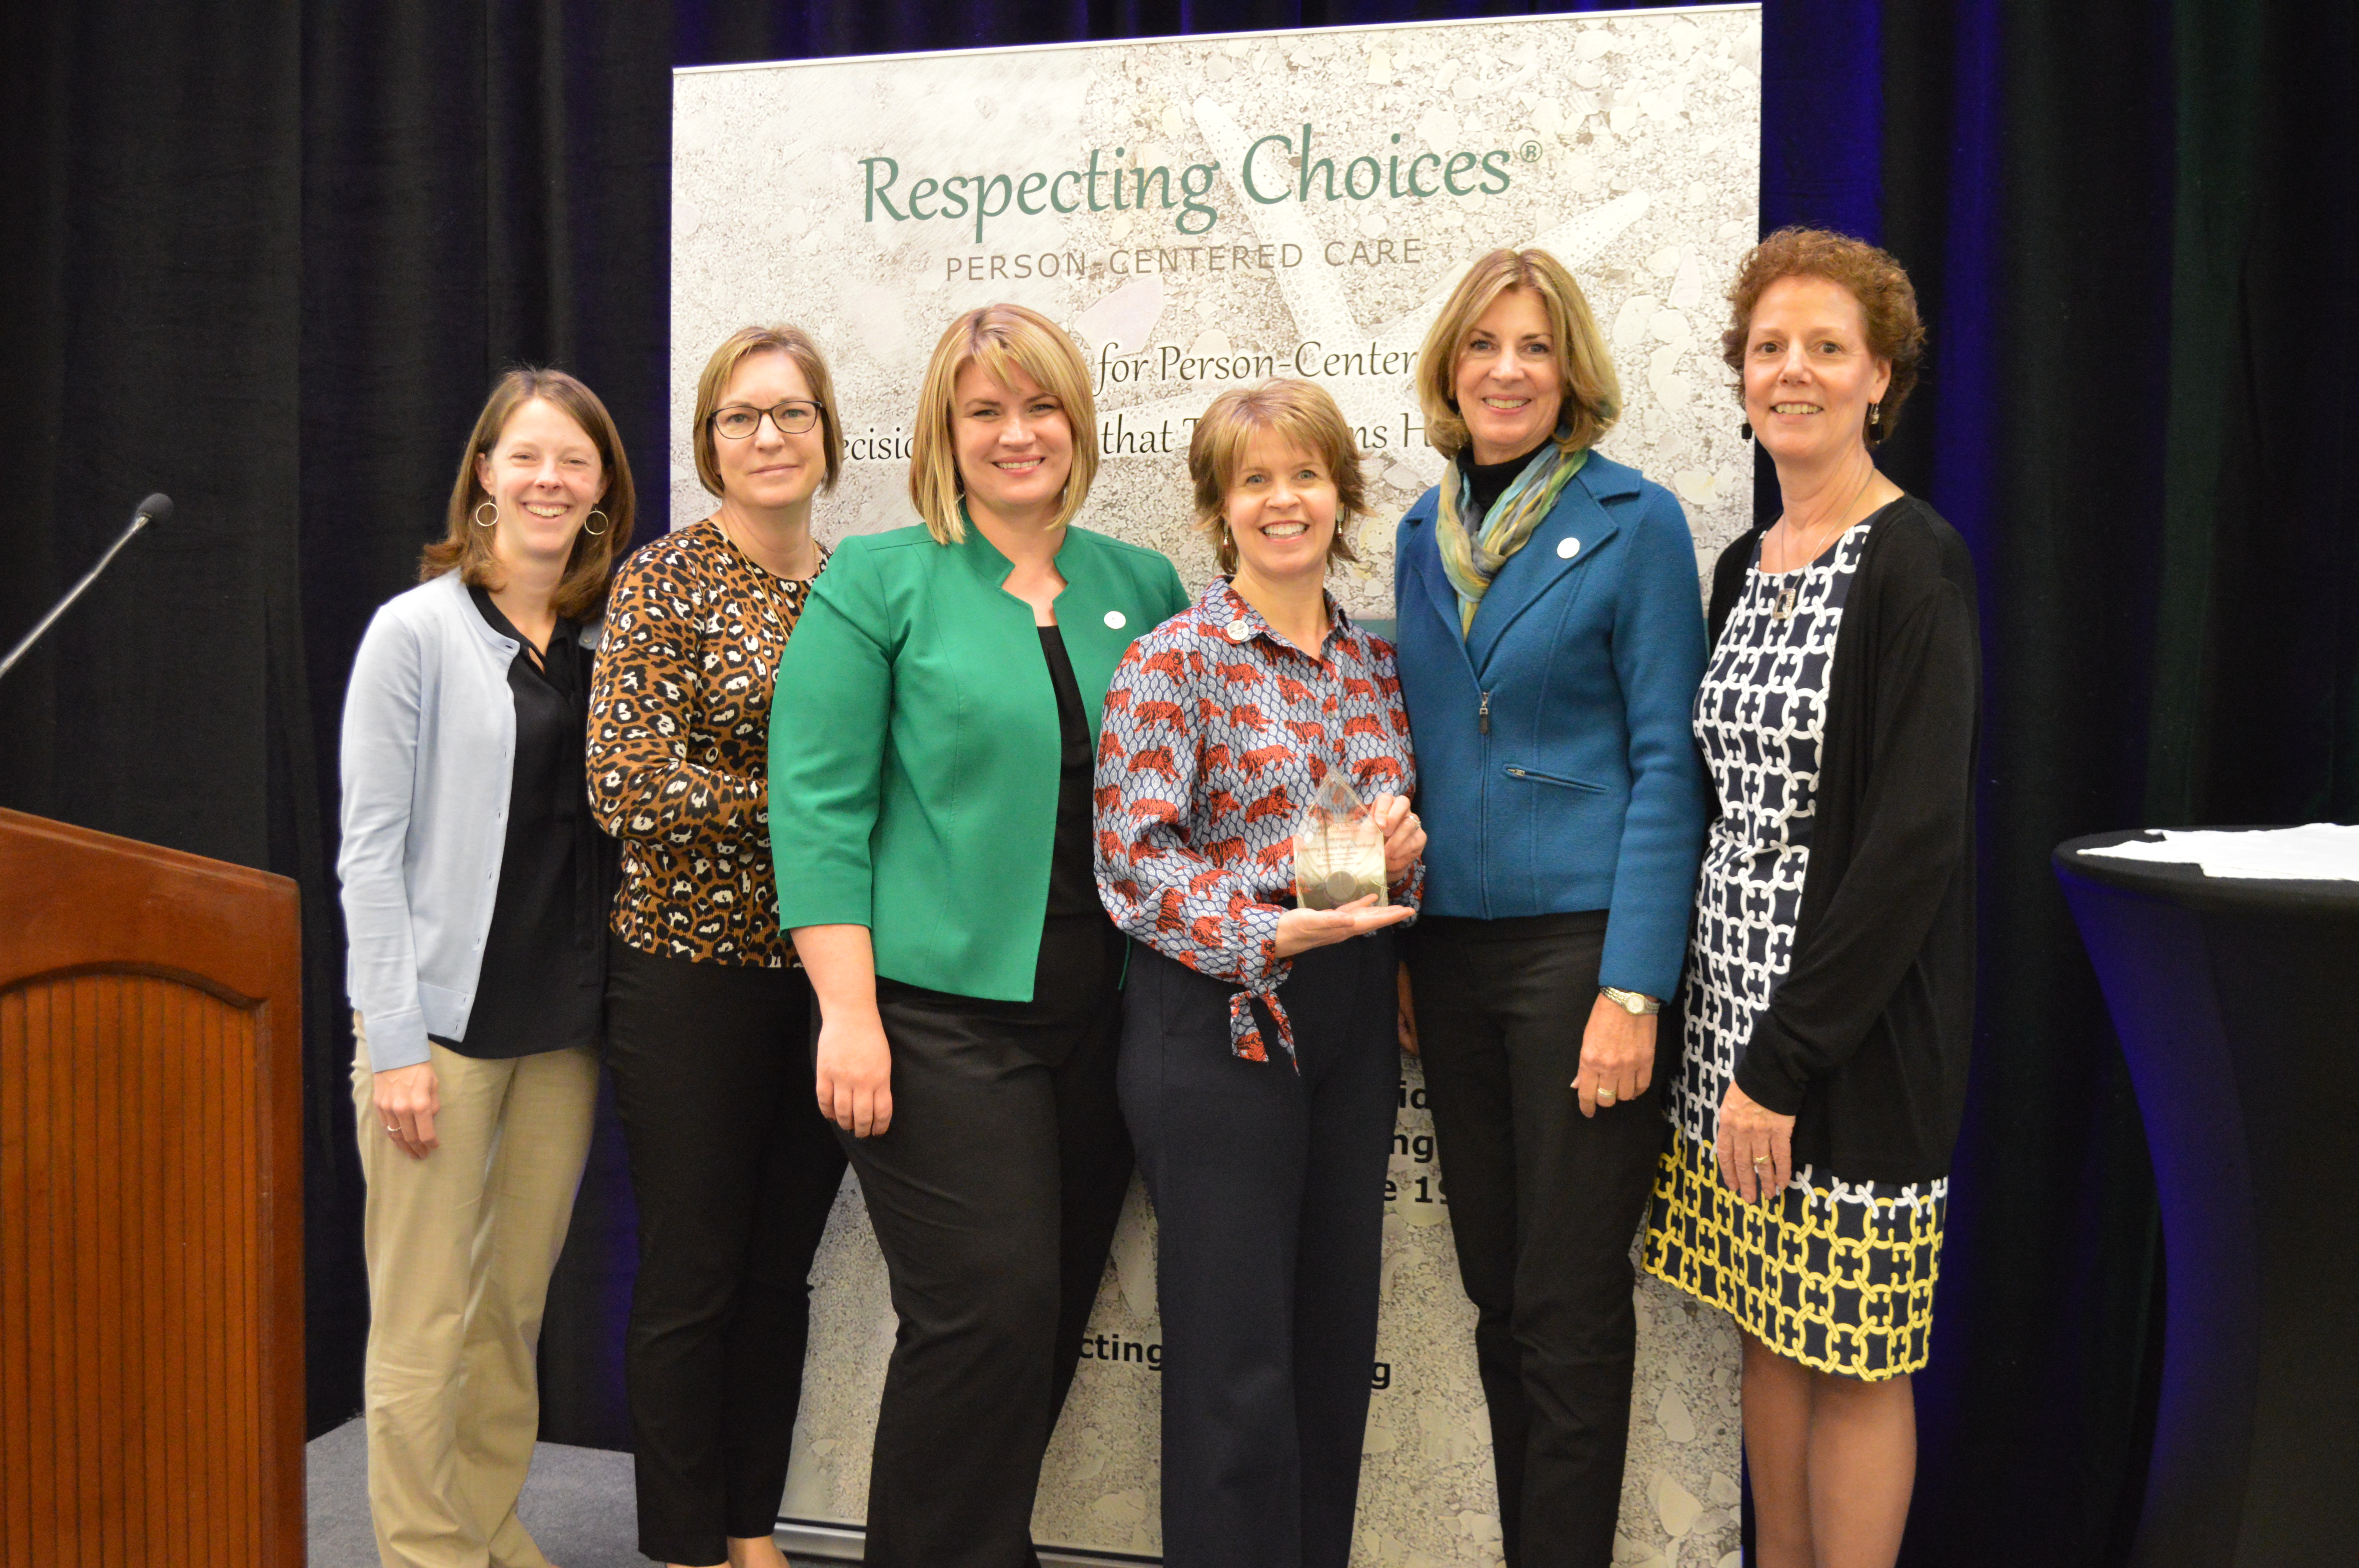 Excellence and Innovation: Statewide Collaboration Improving Person-Centered Care - Recipient: Honoring Choices Pacific Northwest | Pictured from L-R: Mary Caitlin, Michelle Kulhanek, Jessica Martinson, Bonnie Bizzell, Kim Stagner, Kellie Durgan